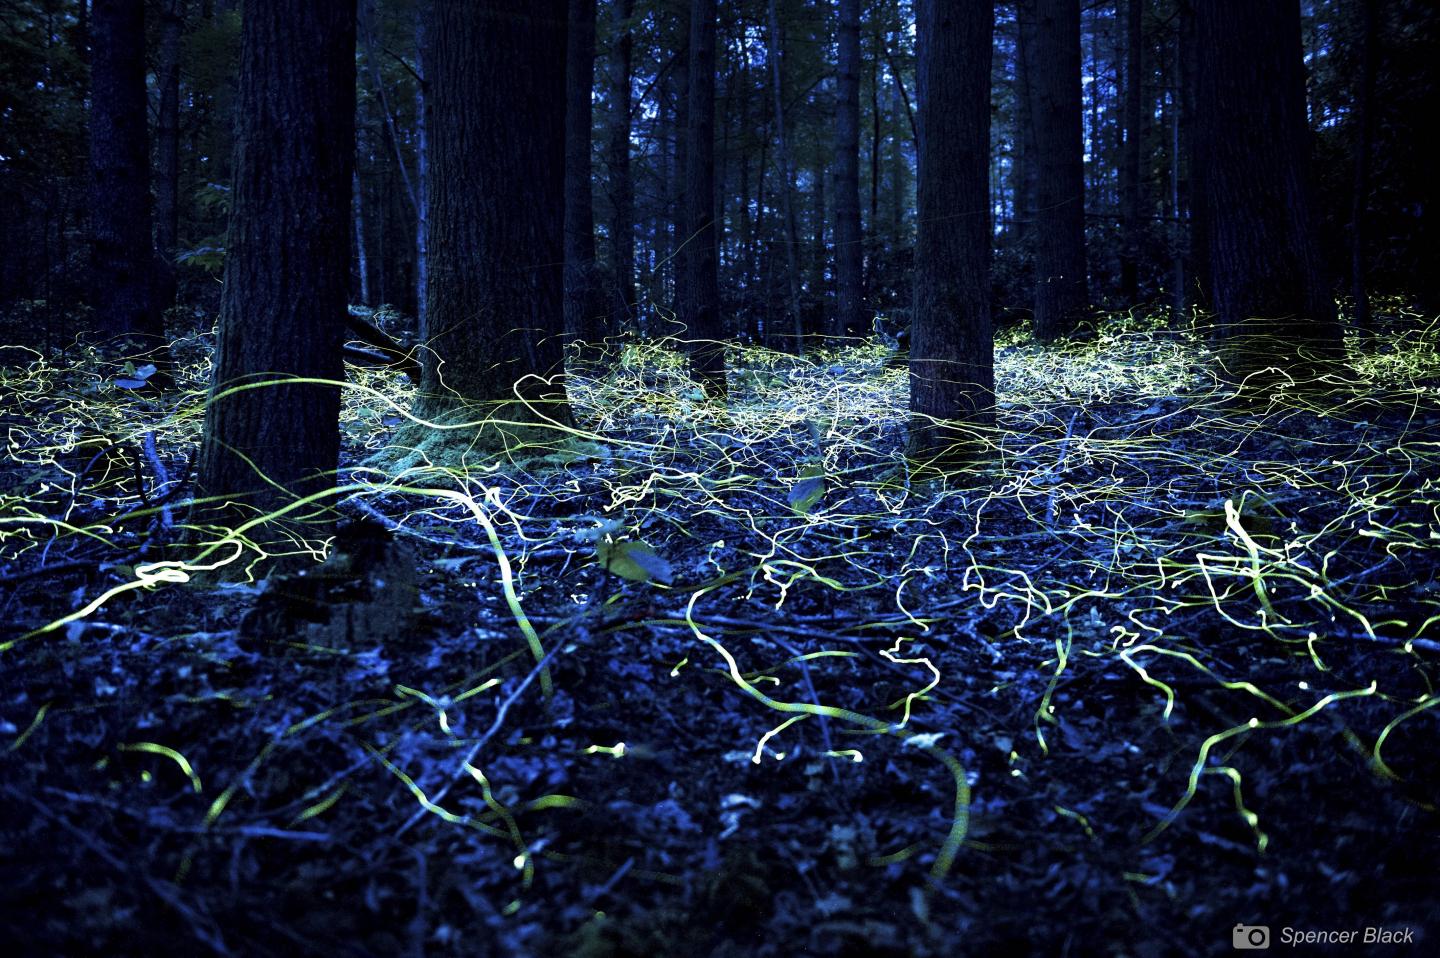 North Carolina Blue Ghost fireflies susceptible to trampling